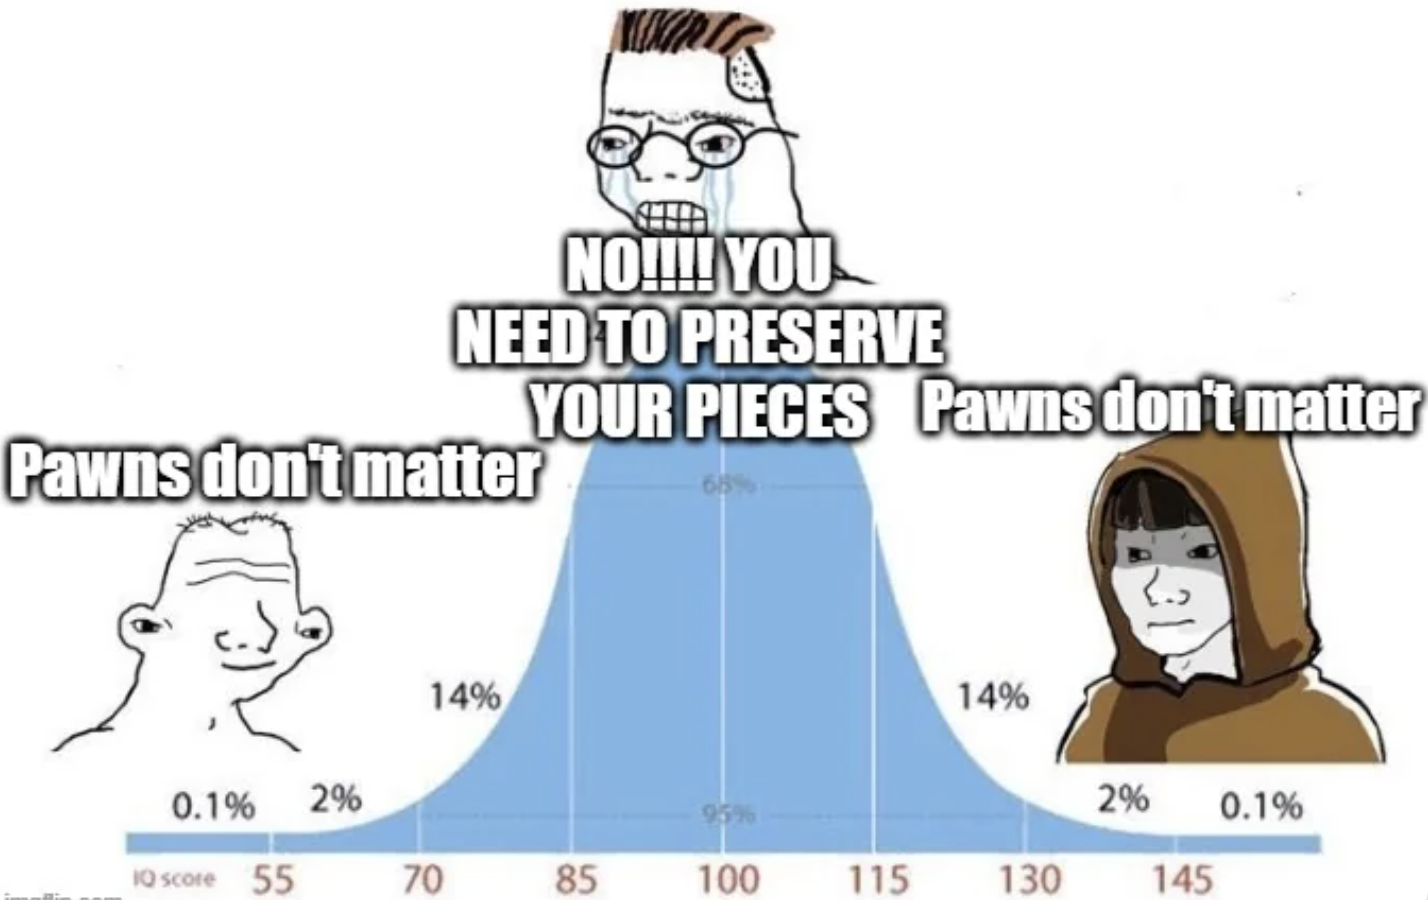 cartoon - No!!!! You Need To Preserve Pawns don't matter Your Pieces Pawns don't matter 14% 14% 0.1% 2% 99% 2% 0.1% 10 score 55 70 70 85 100 115 130 145